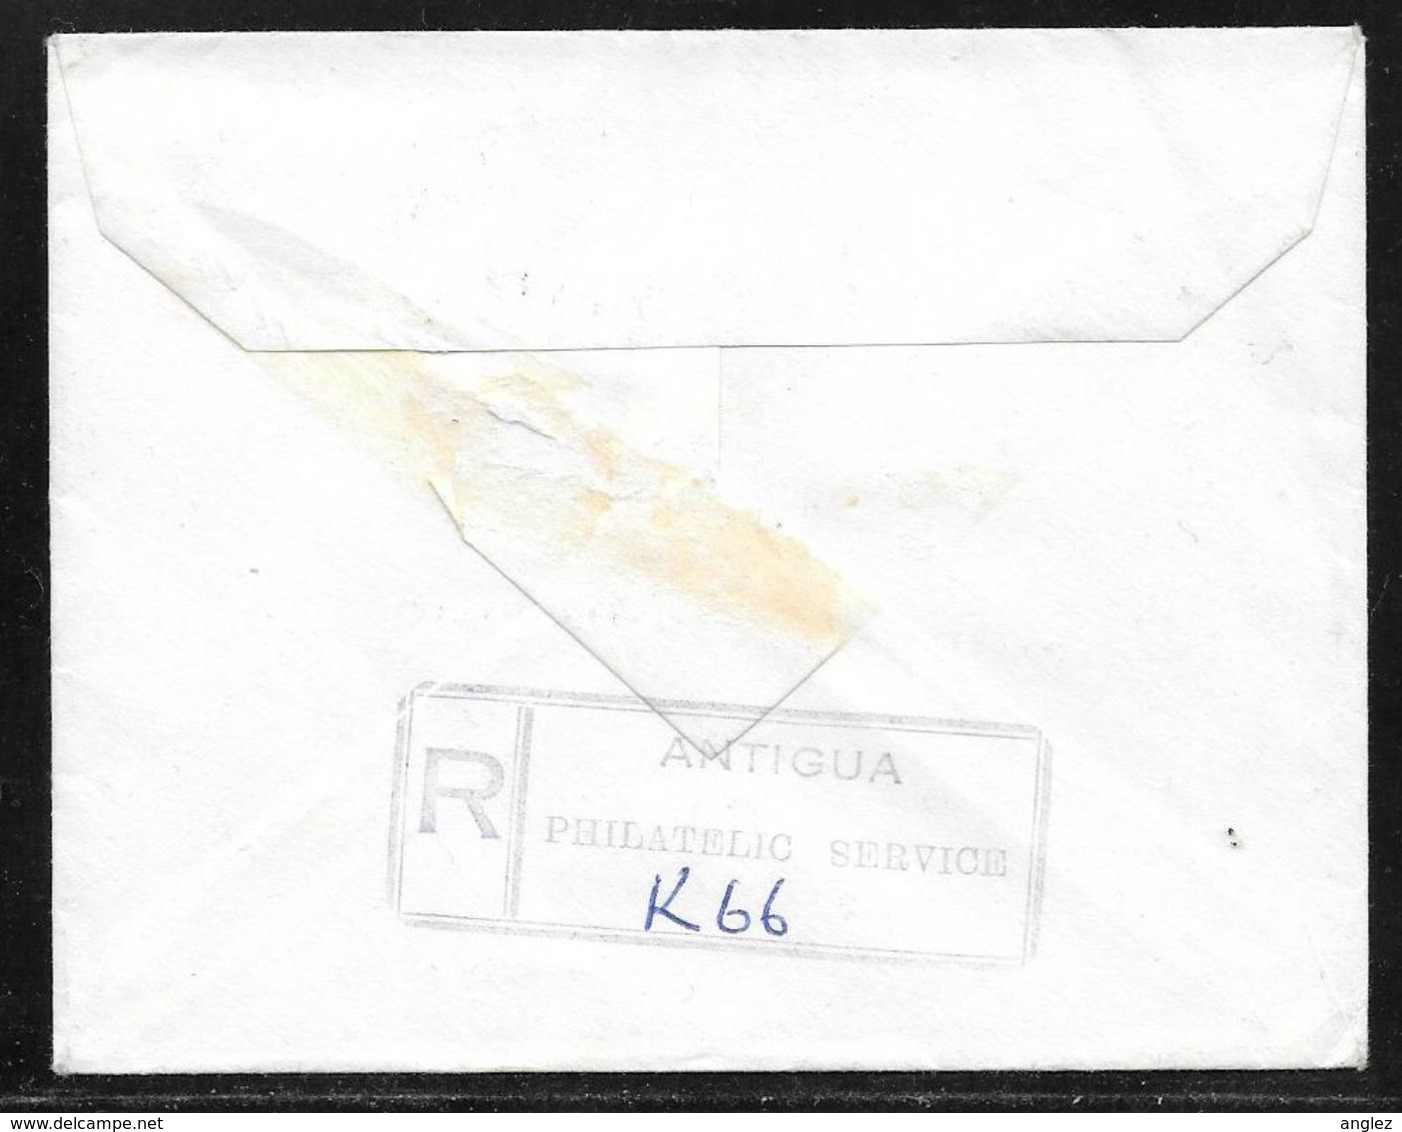 Antigua - 1970 Registered Cover To UK - Franked 40c Arms Definitive Stamps - 1960-1981 Autonomie Interne